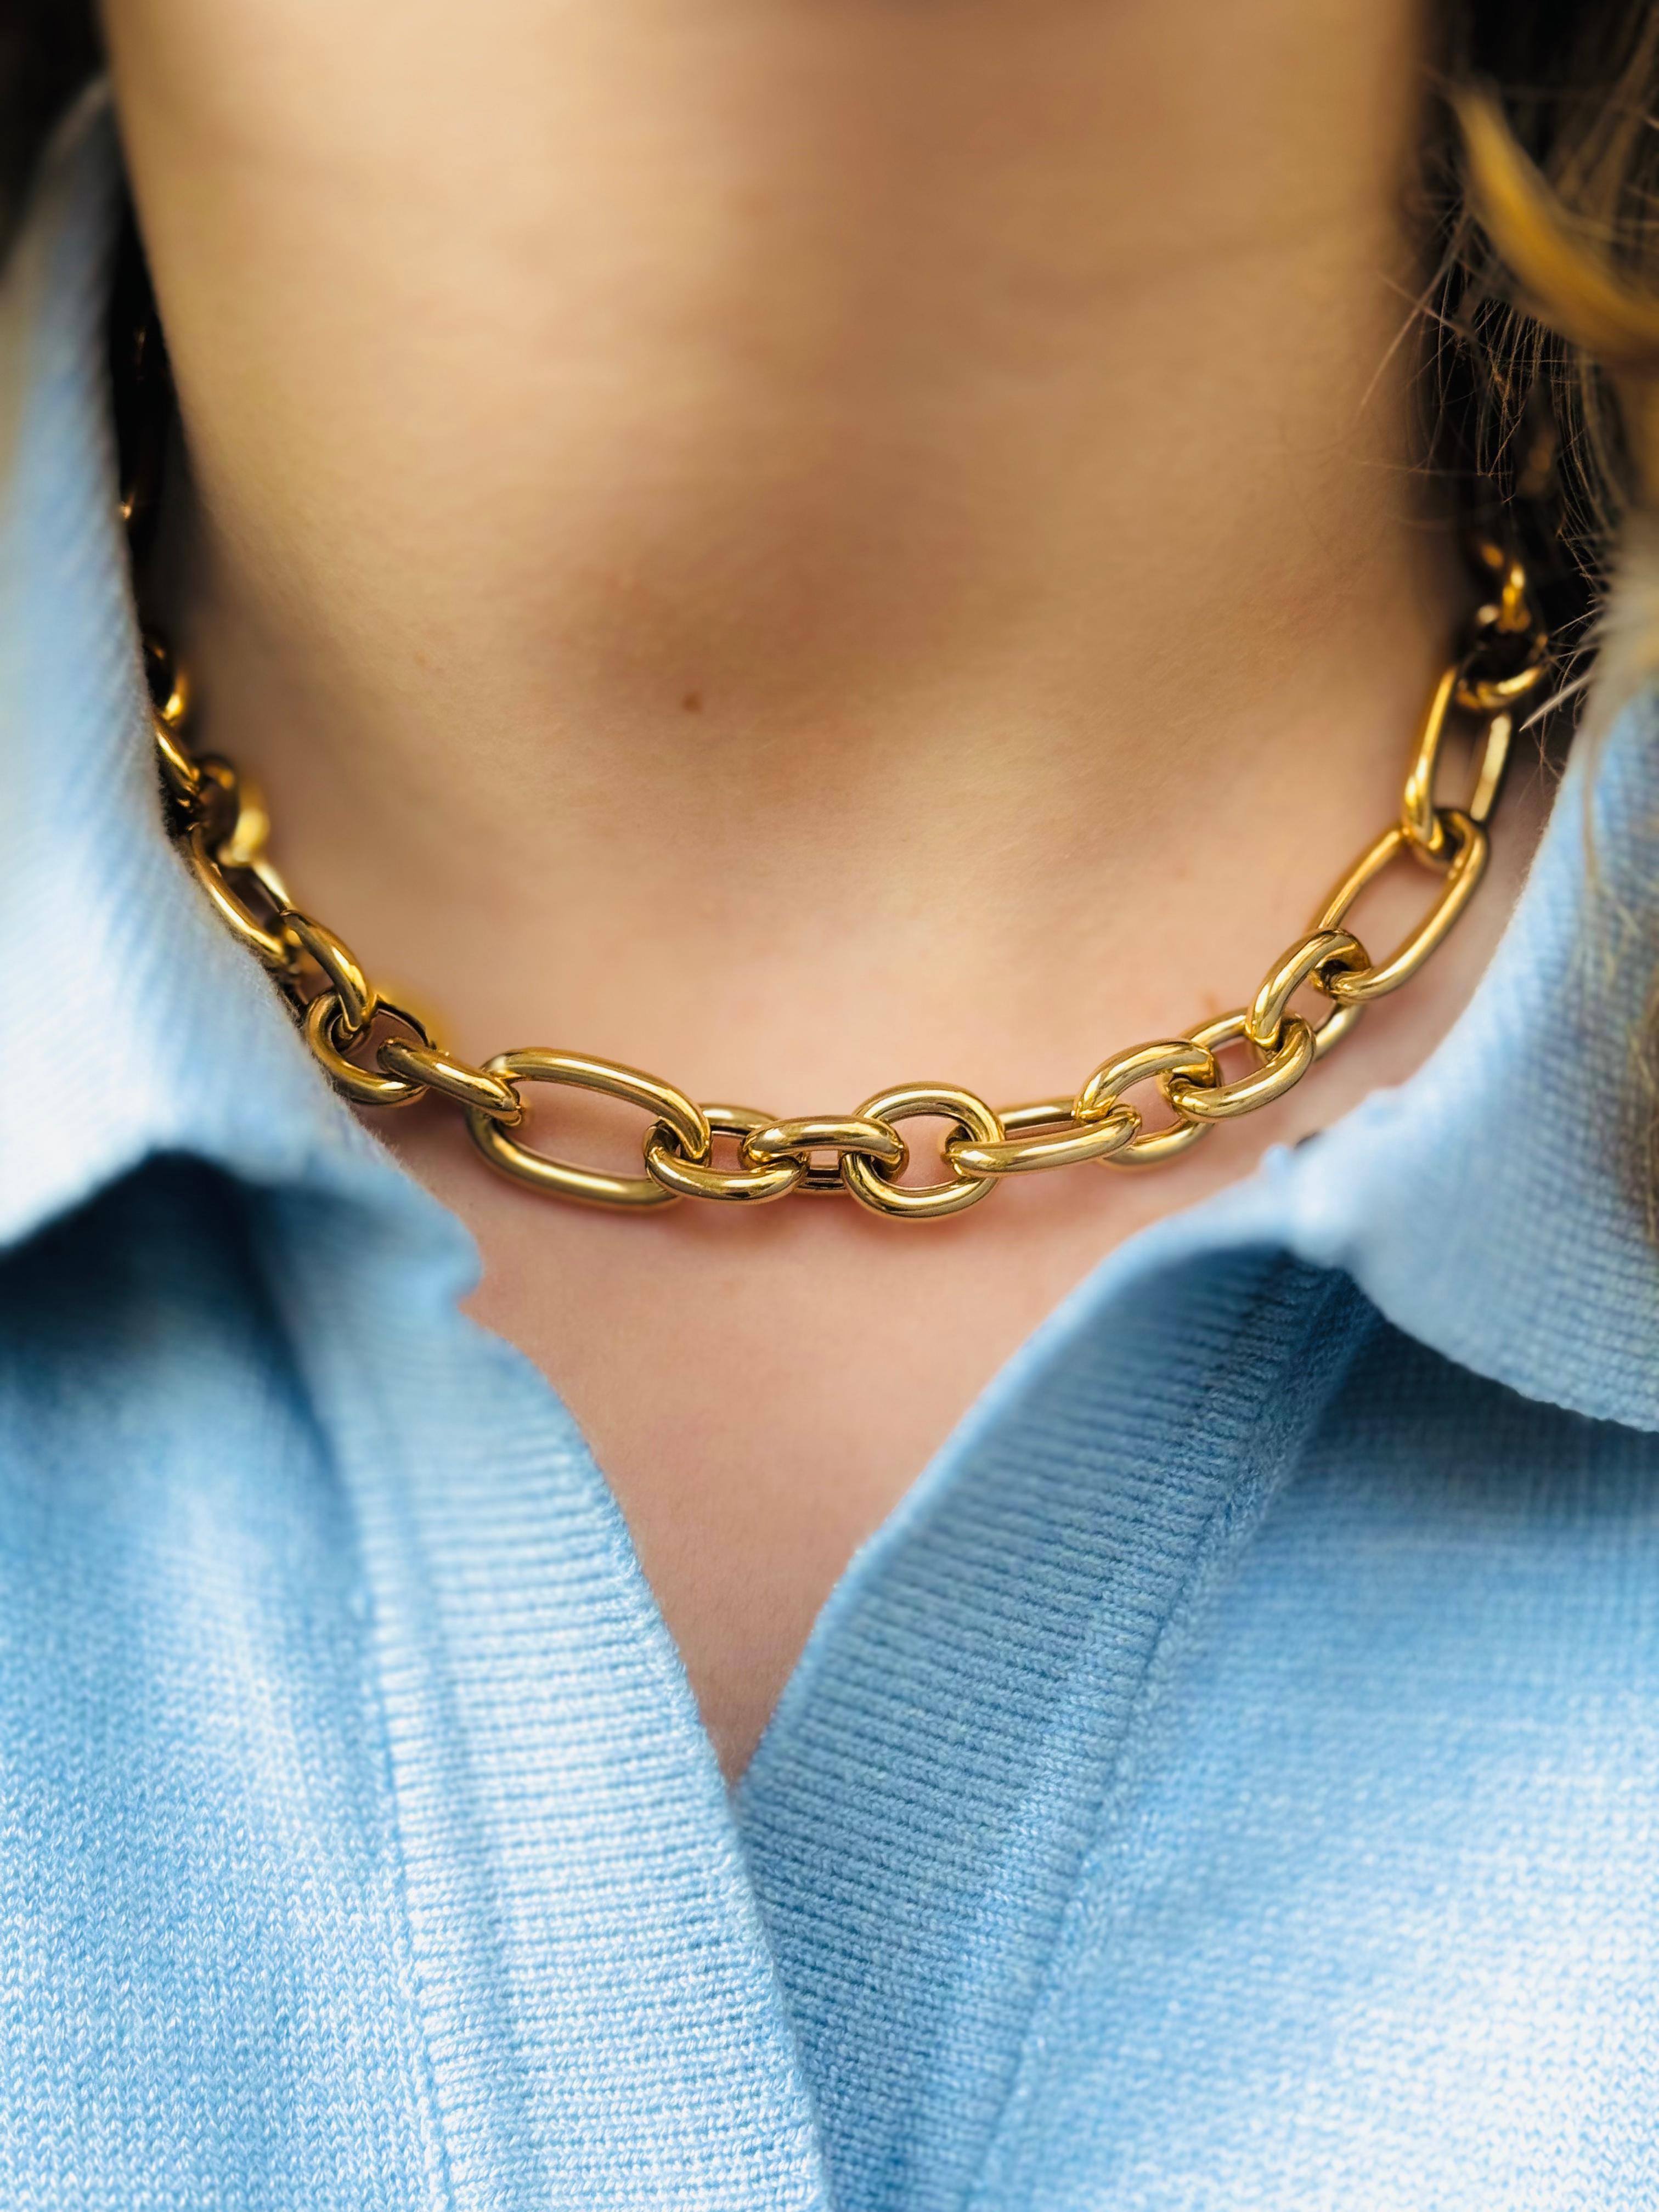 Sculptural links that reimagine the classic chain as fluid form, exclusive to Maviada,  in luxurious recycled 18k gold. Everyday quiet luxury investment piece that will last a lifetime.

A stunning yellow gold necklace, featuring a contemporary